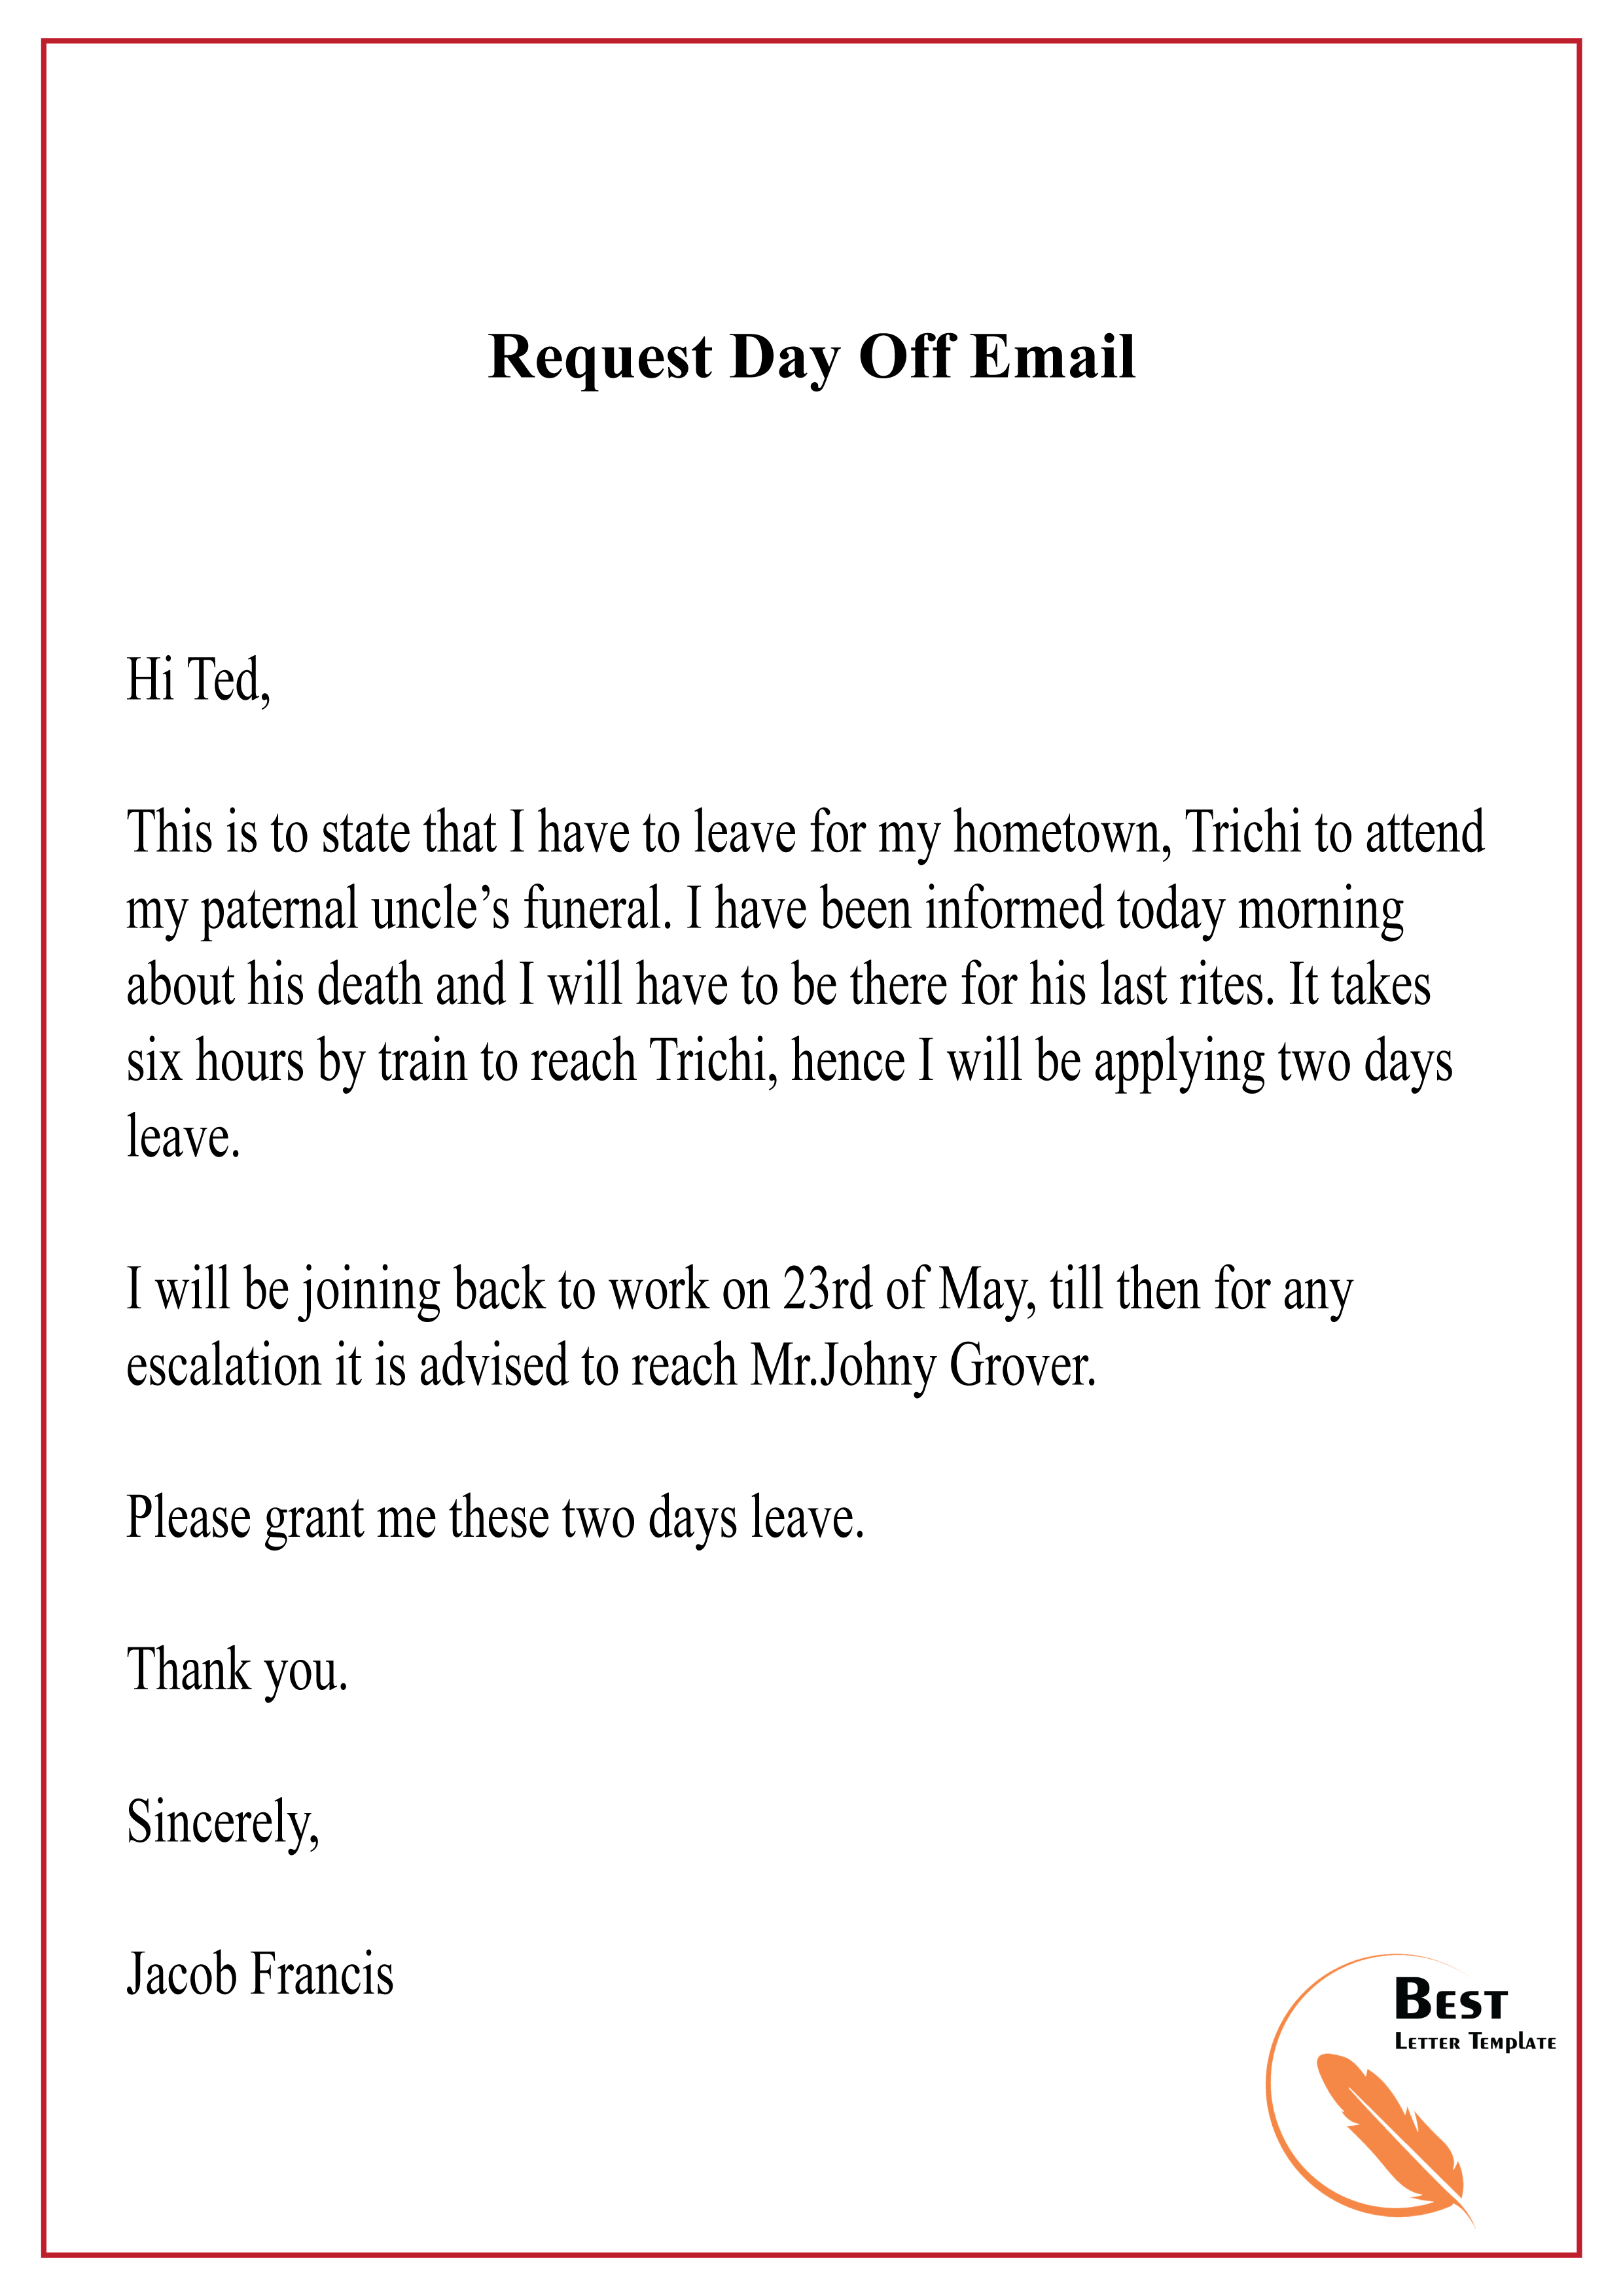 Request Day Off Email01 Best Letter Template